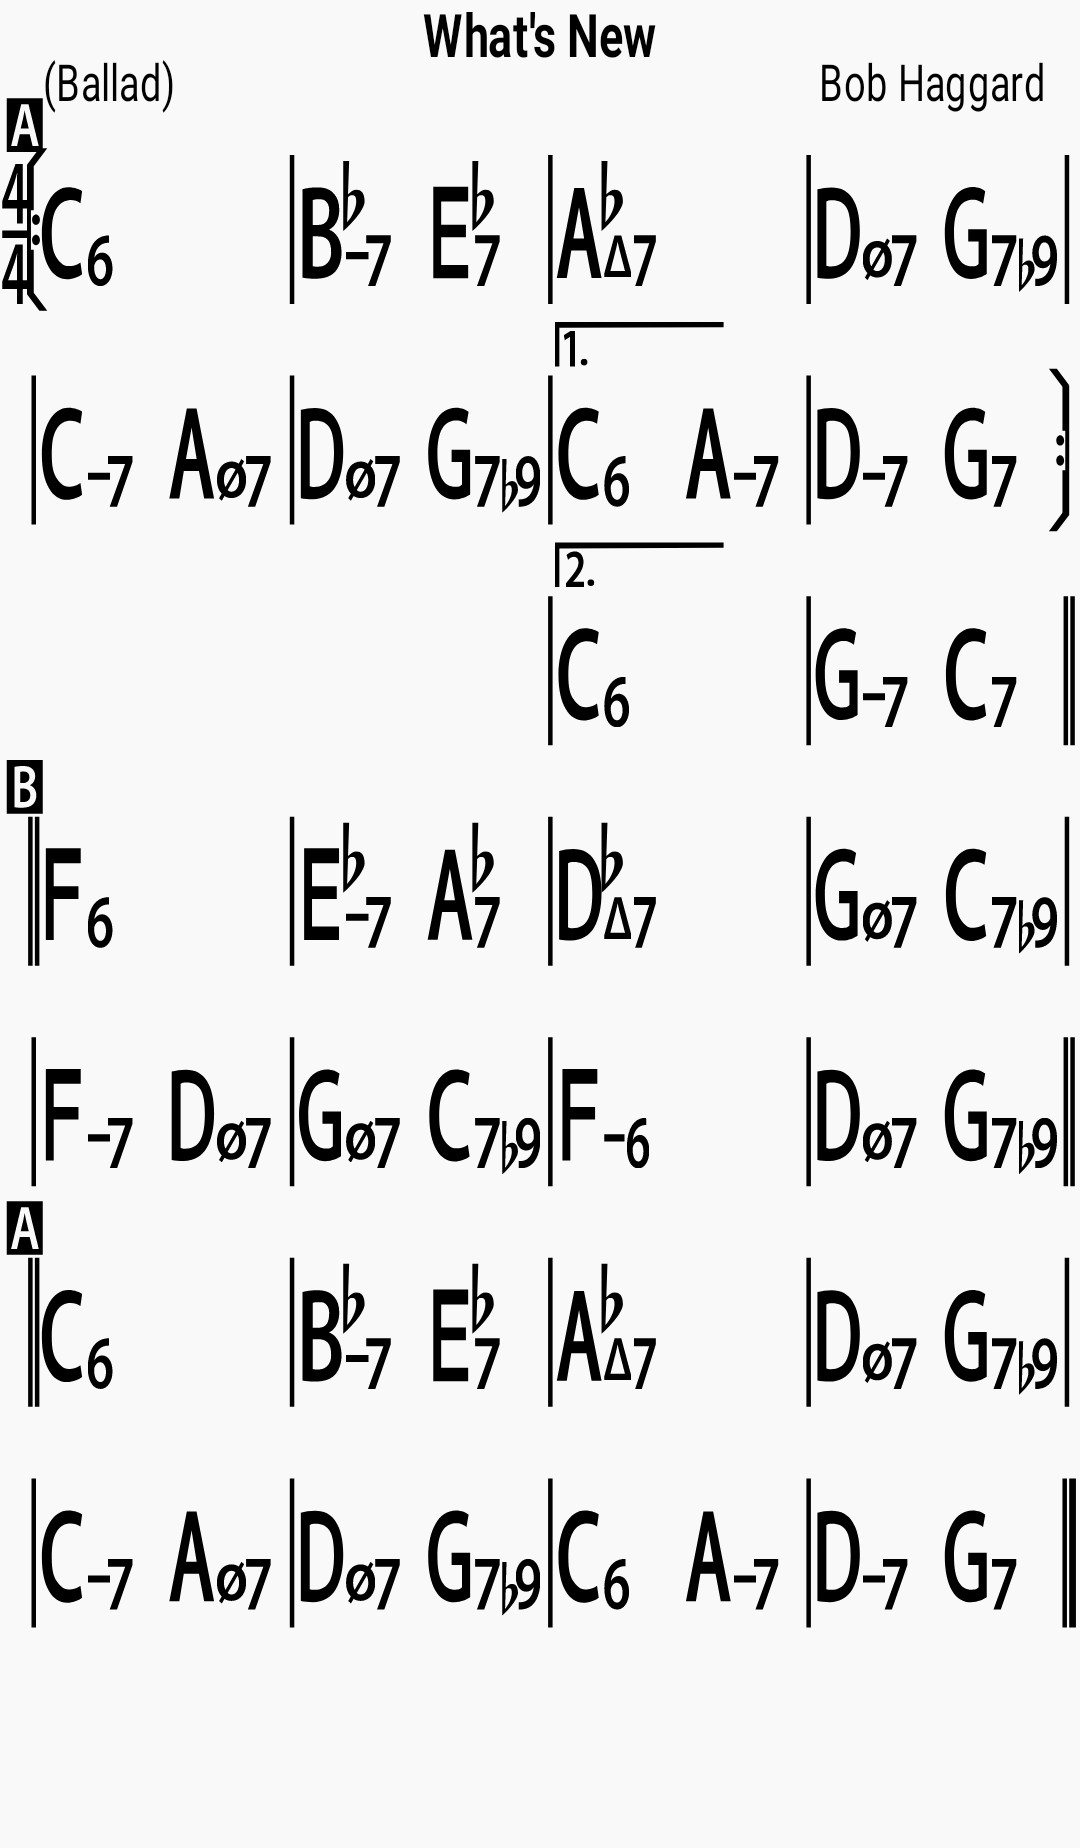 Chord chart for the jazz standard What's New